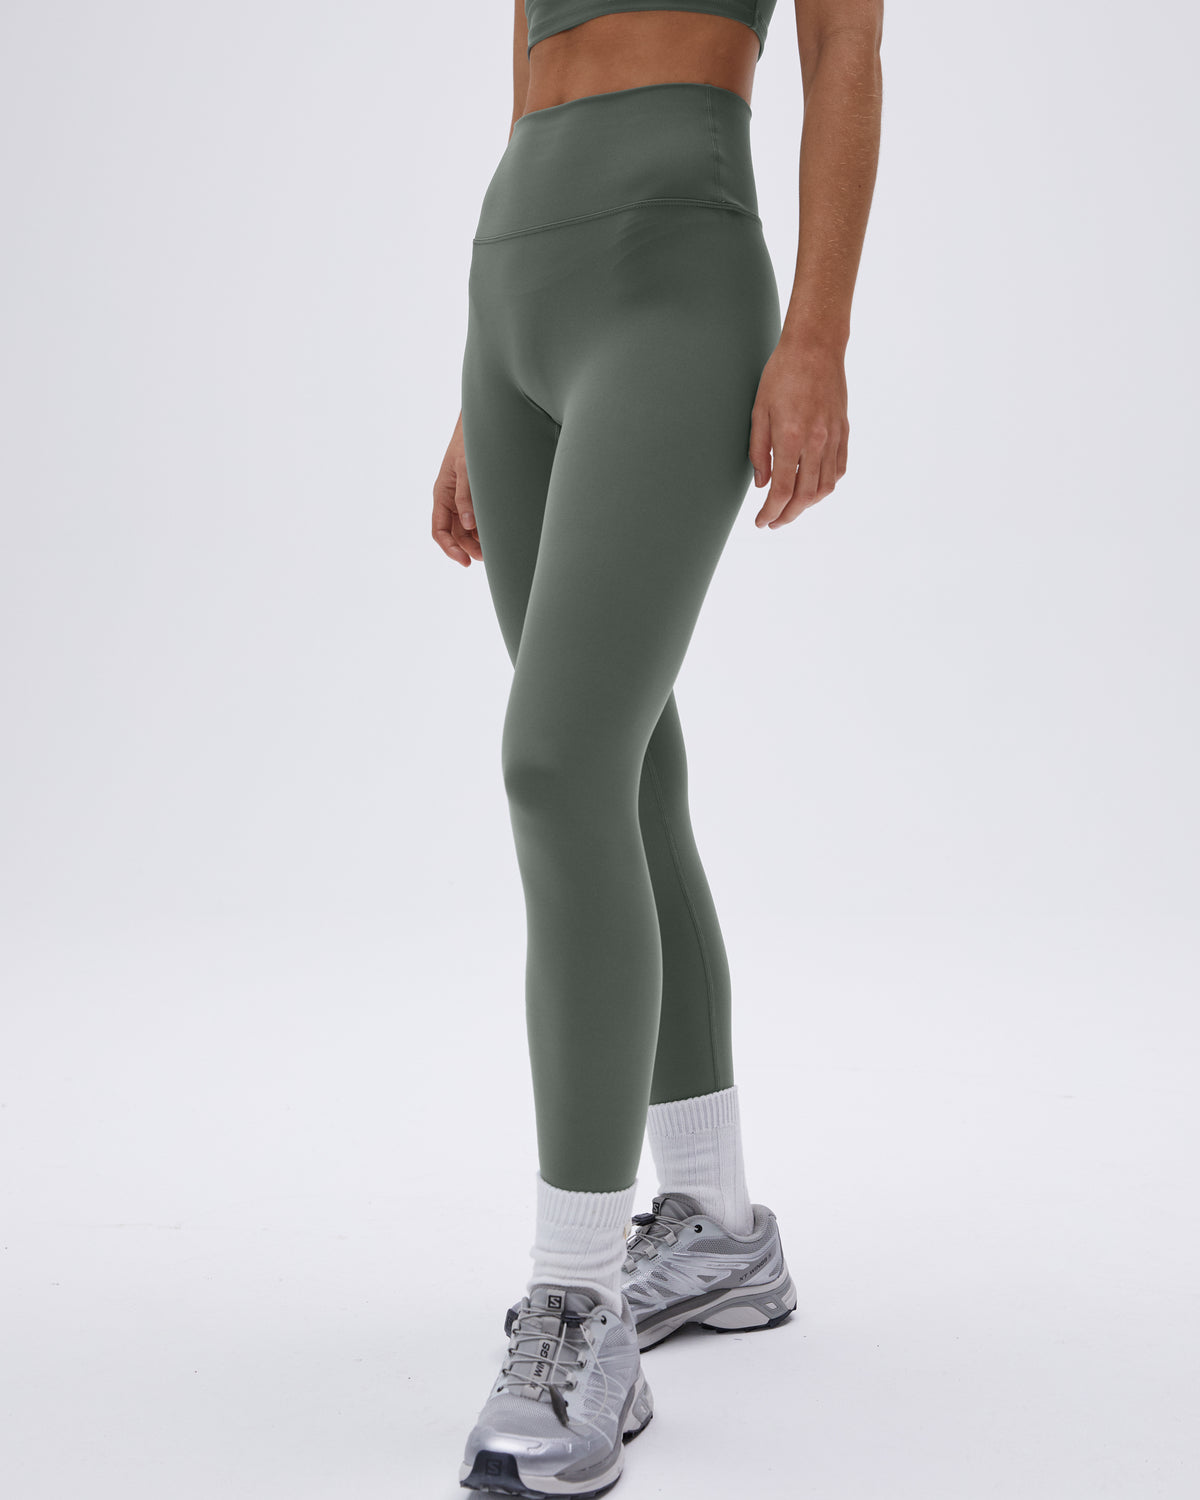 prAna Roxanne Printed Legging - Women's-Green — Inseam Size: 23 in, Gender:  Female, Age Group: Adults, Apparel Fit: Athletic, Color: Green Chile —  W4ROXA114-GRCH-XS